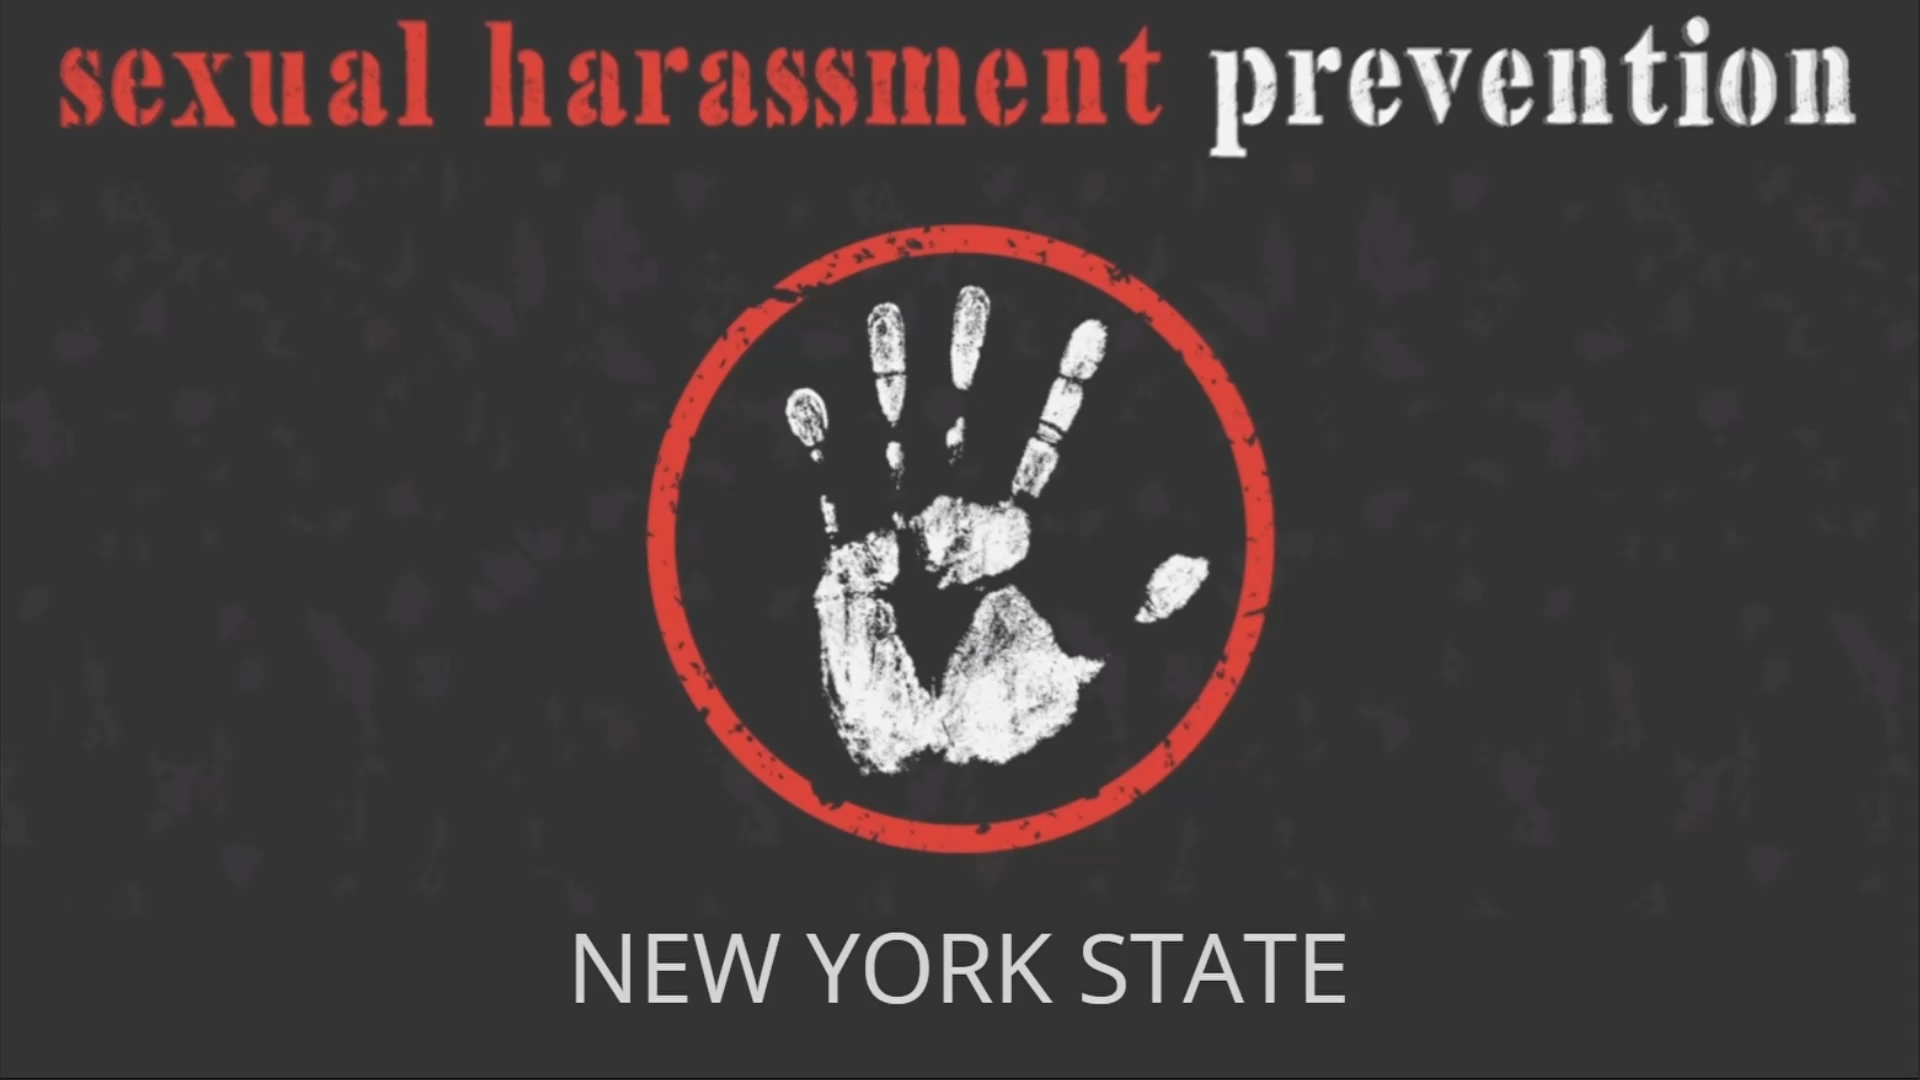 Sexual Harassment Prevention New York State Michael Grunhaus